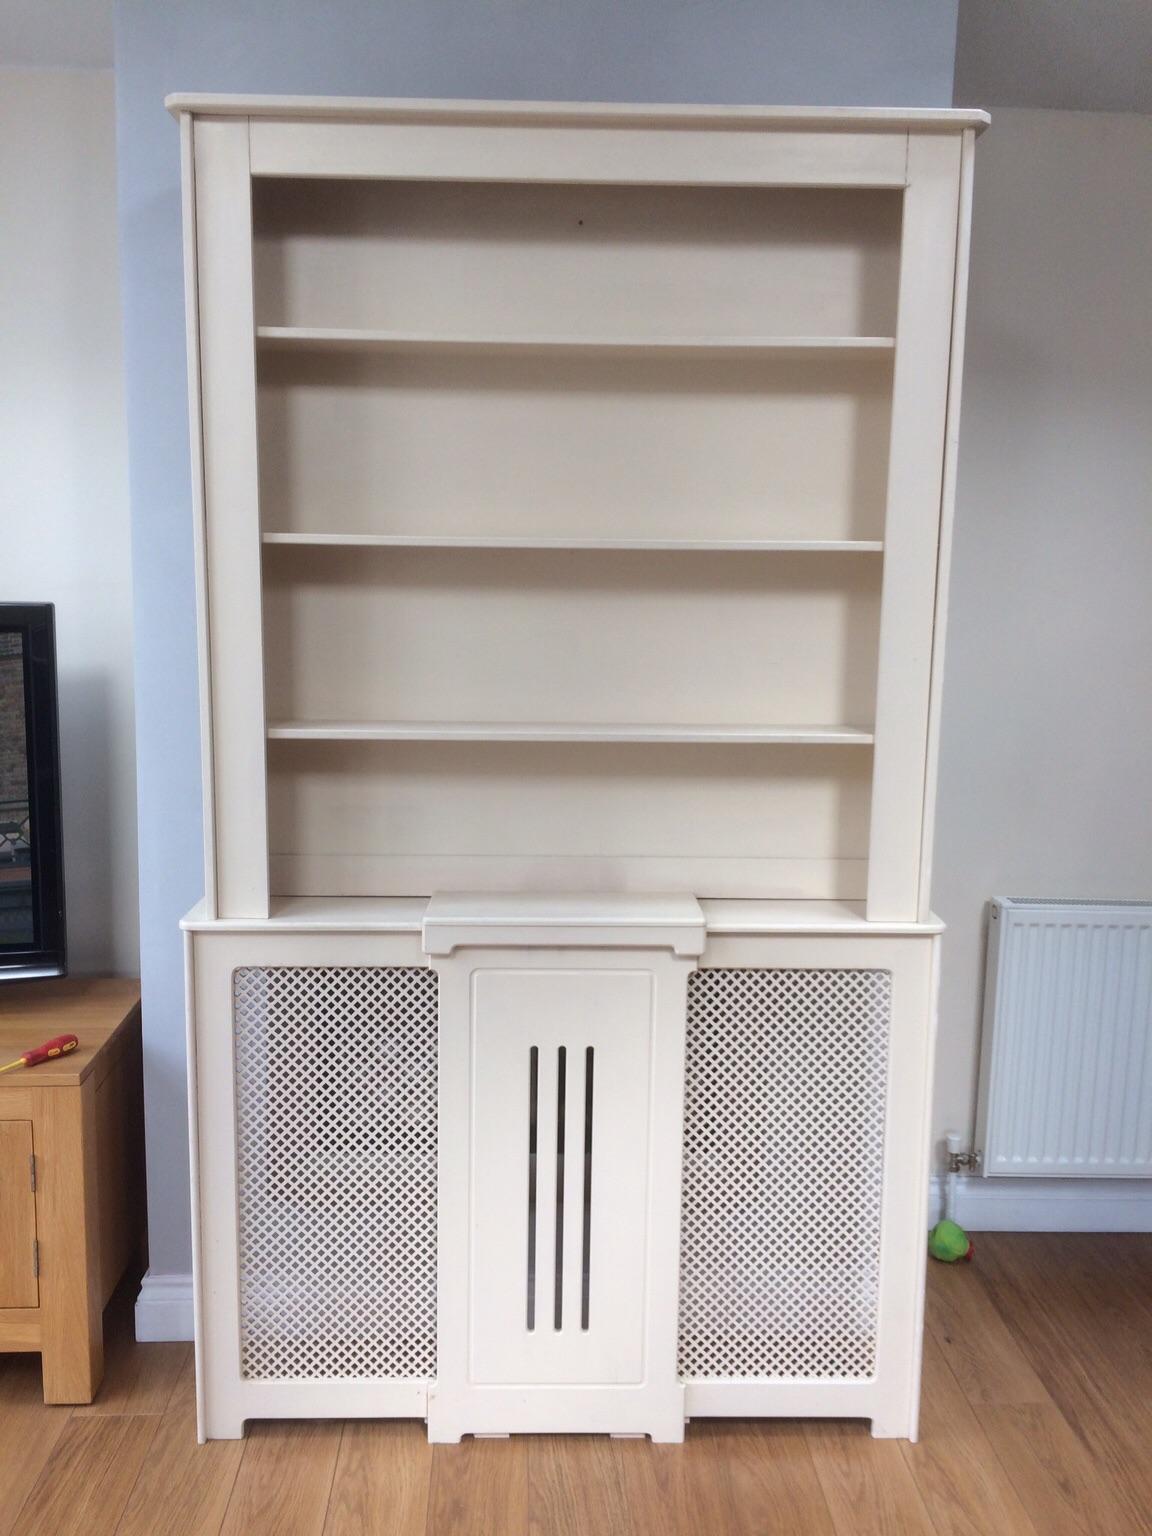 Mdf Radiator Cover And Bookcase In Sa5 Swansea For 25 00 For Sale